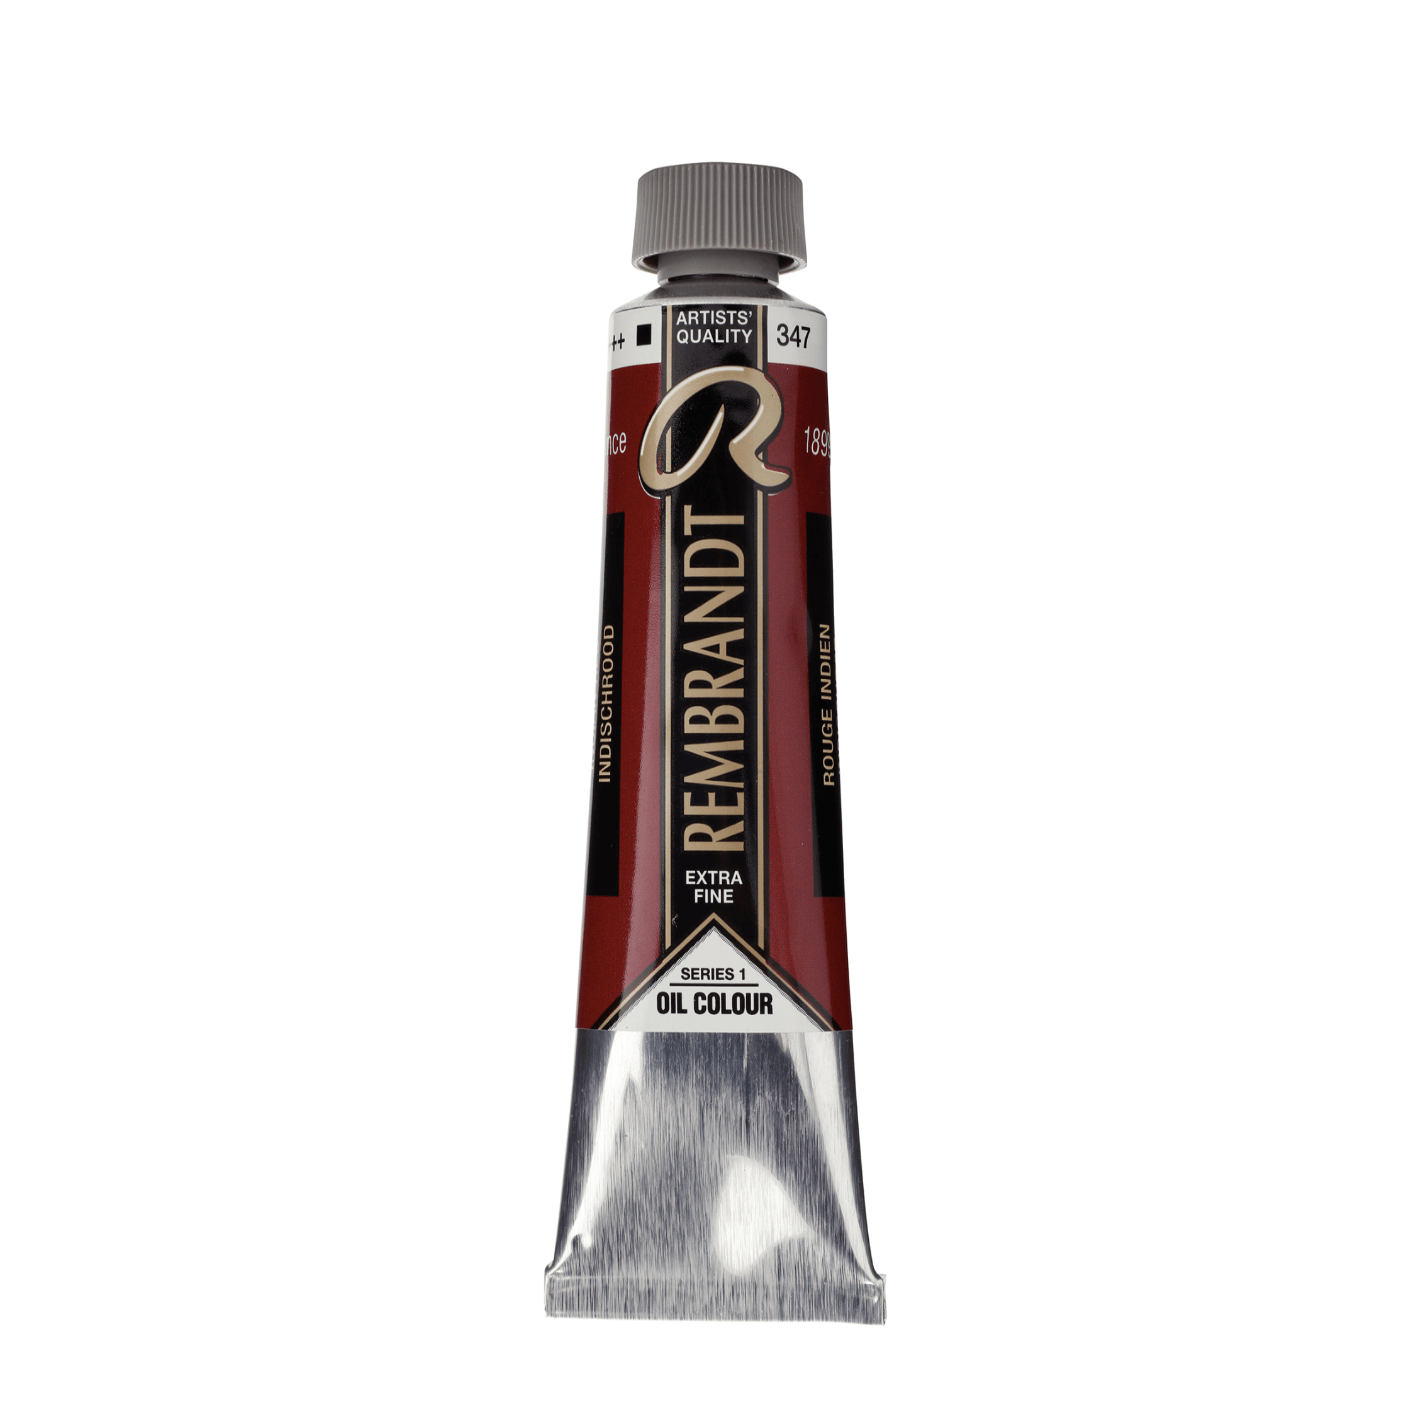 Rembrandt Oliemaling 40ml Indian Red